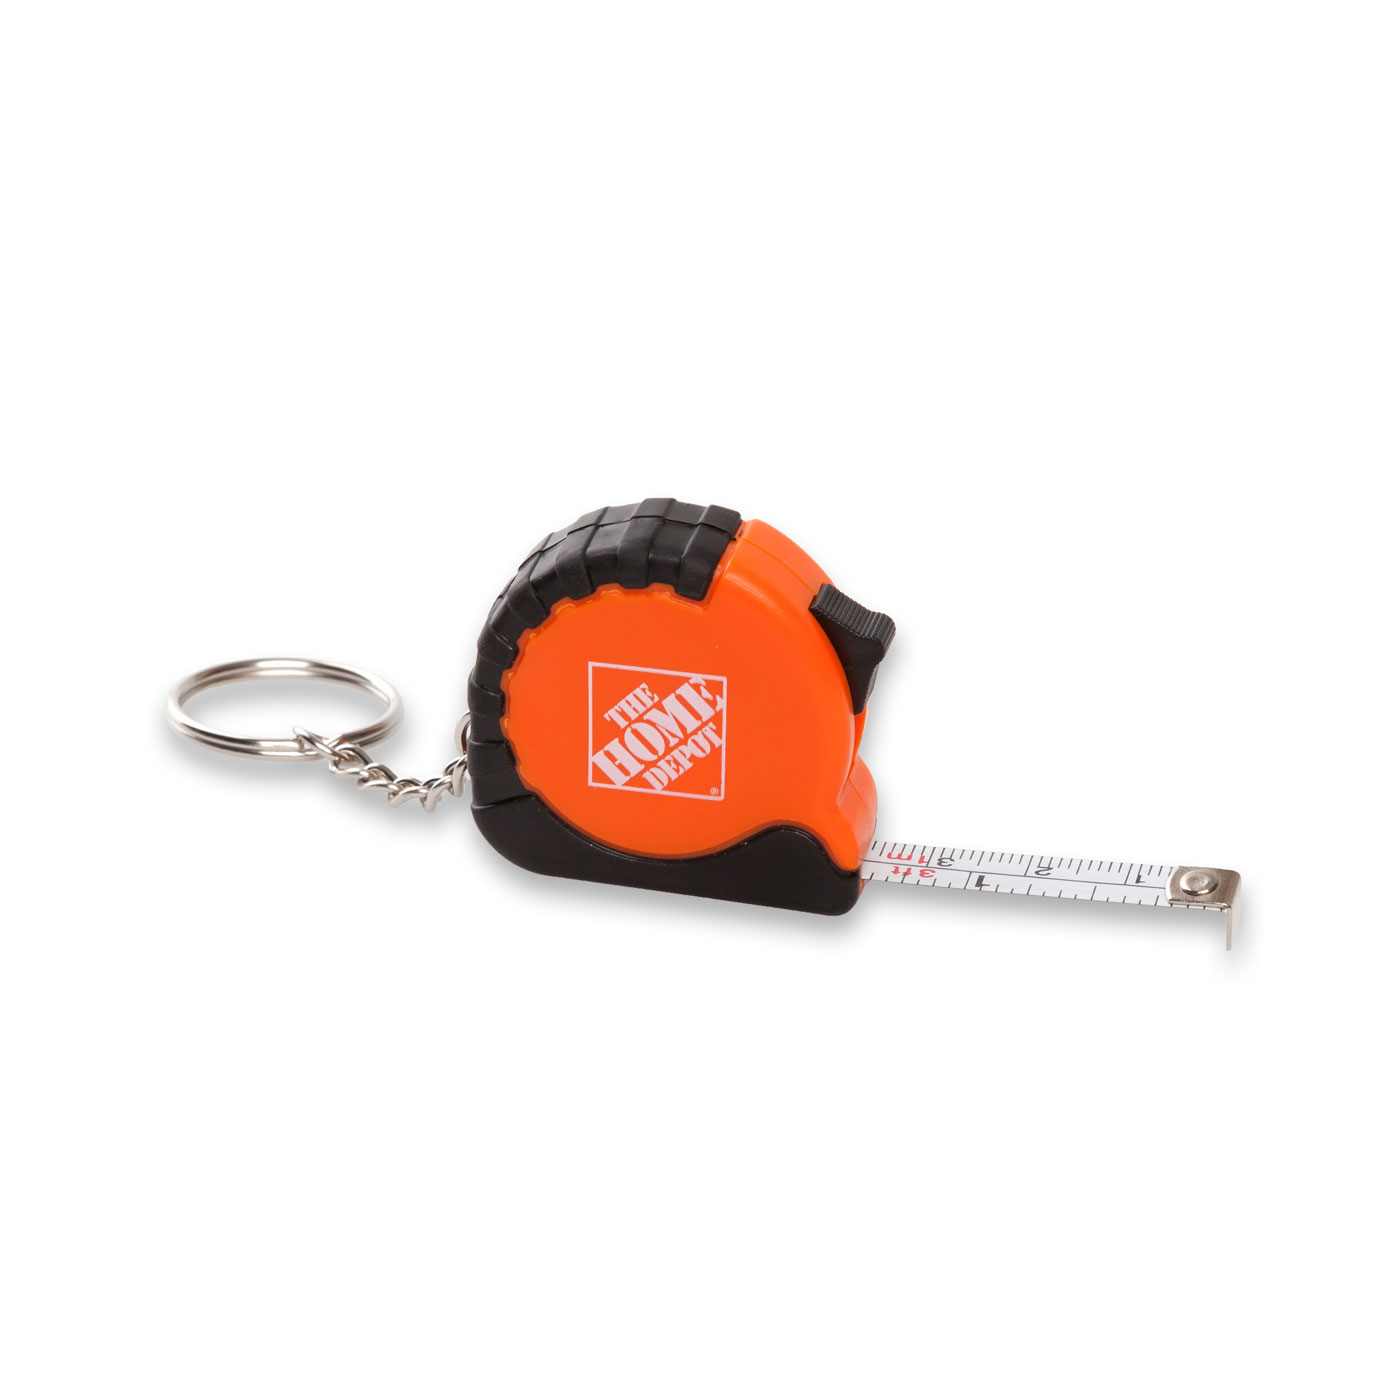 Mini tool kit with Tape Measure and Keychain